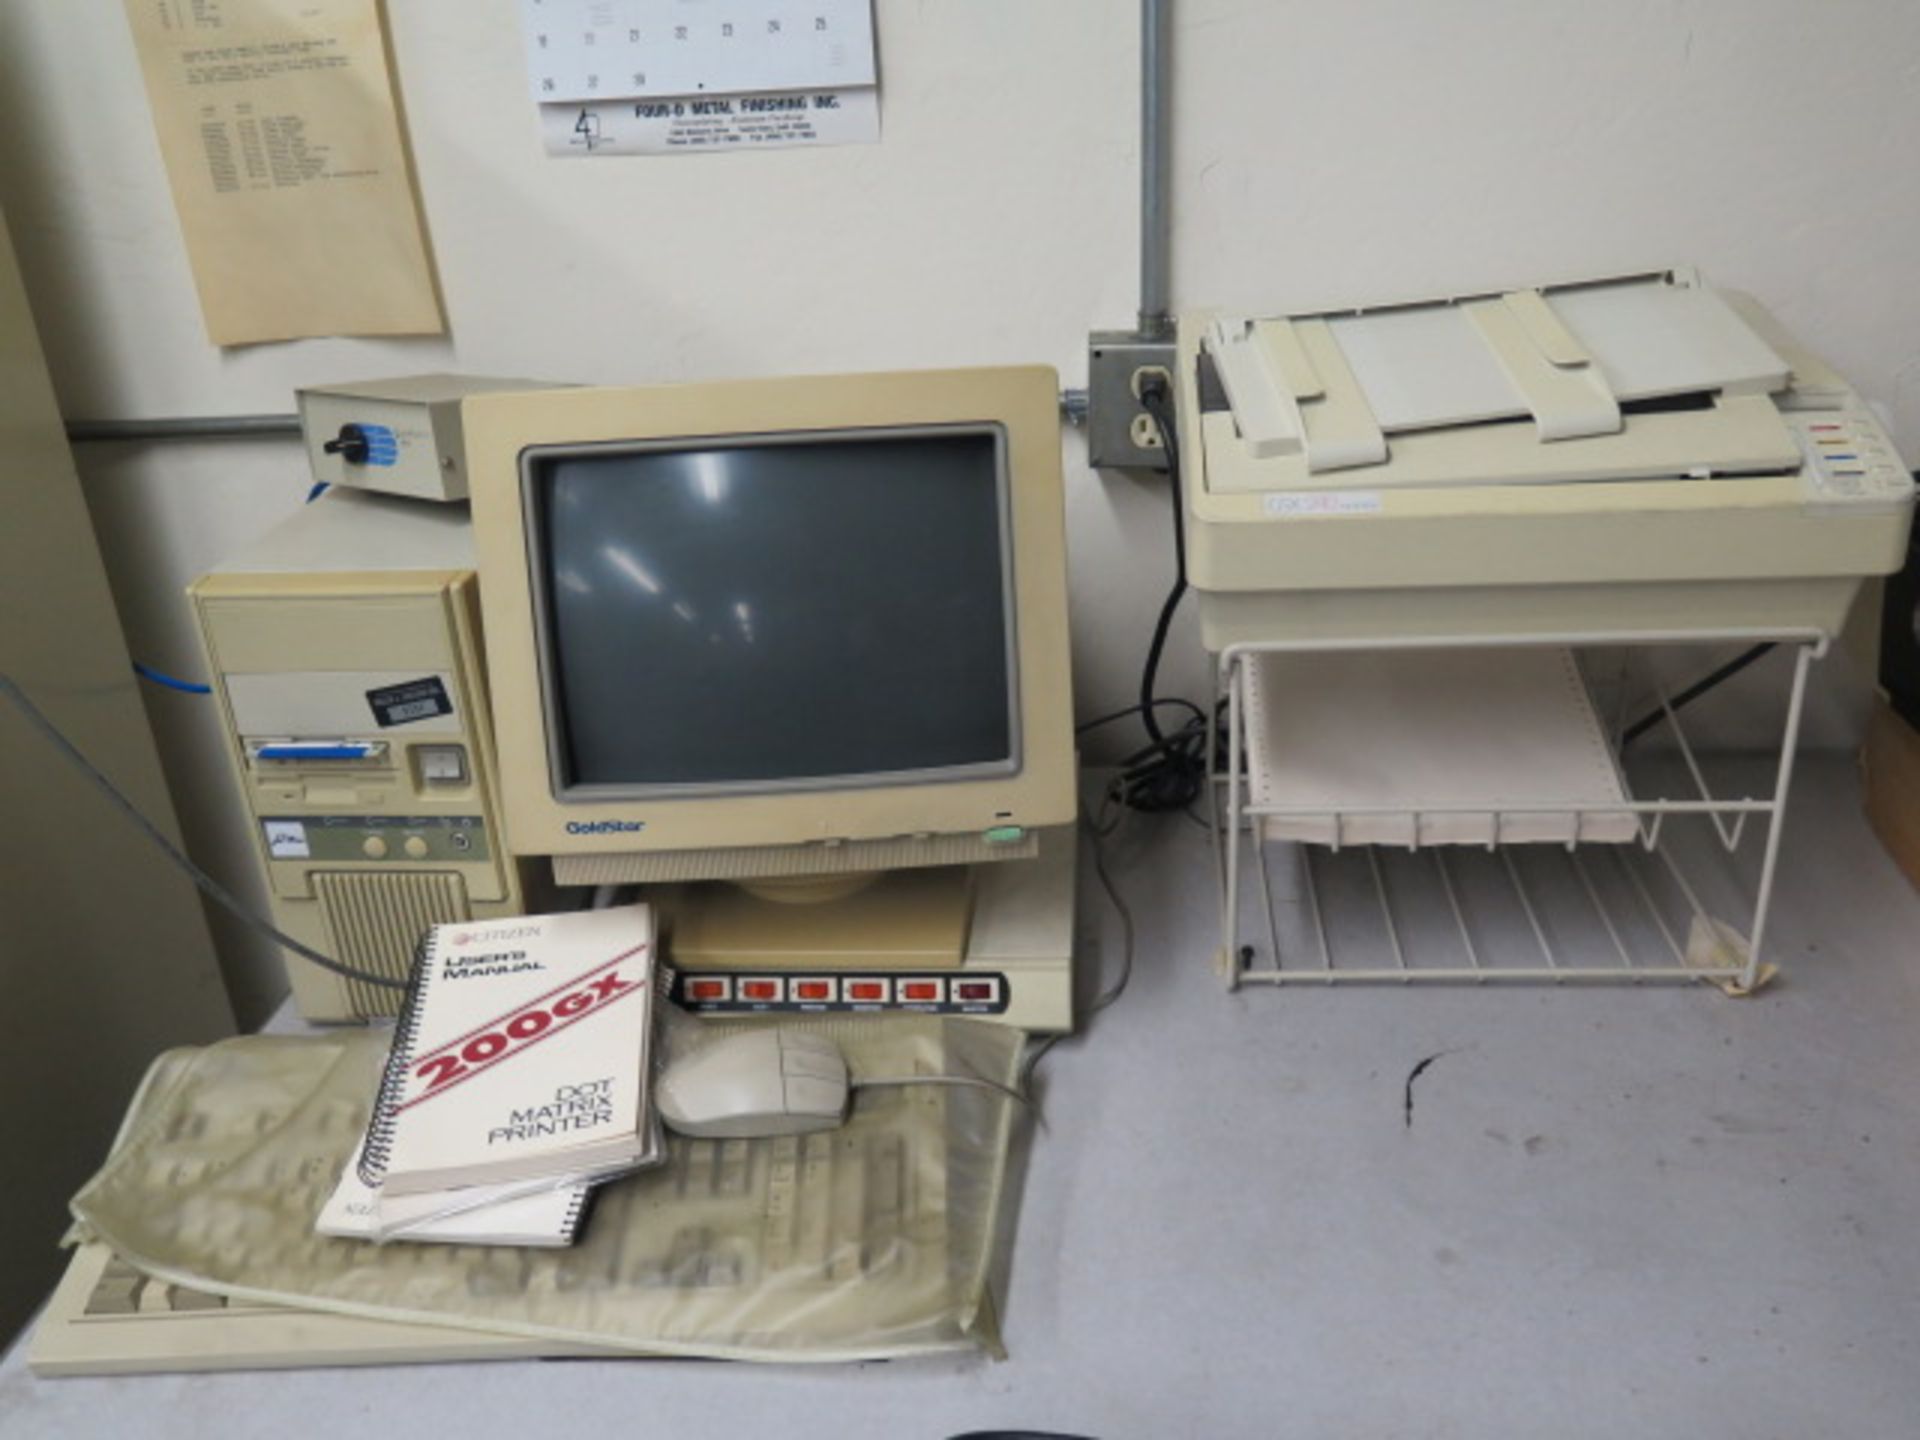 Teletype mdl. 43 Data Terminal and Computer w/ Desk - Image 2 of 4